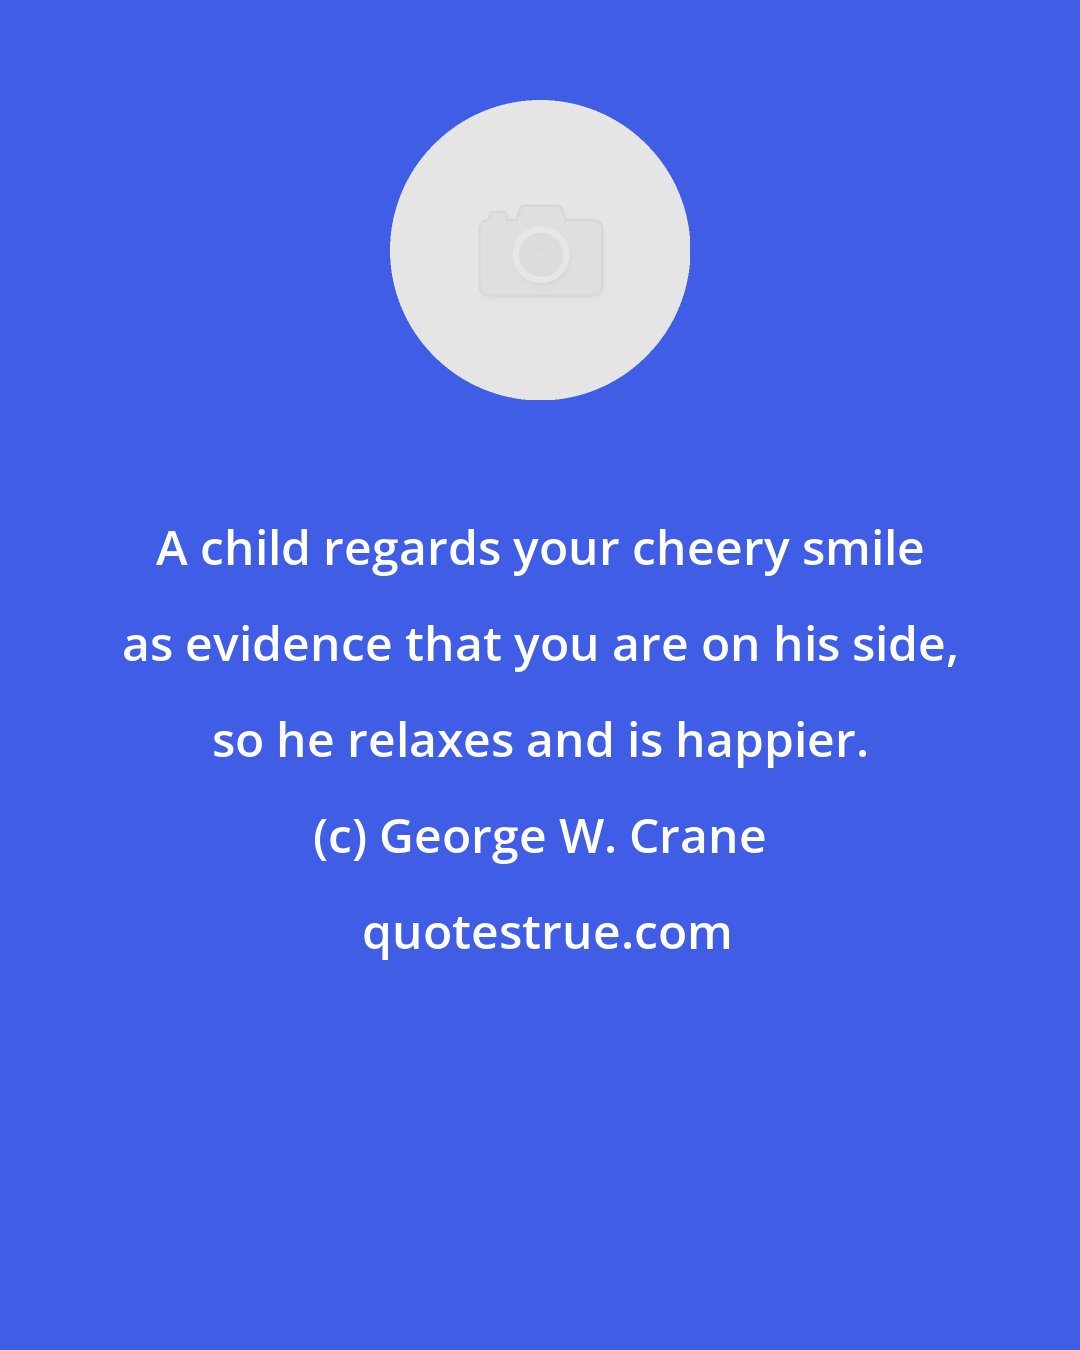 George W. Crane: A child regards your cheery smile as evidence that you are on his side, so he relaxes and is happier.